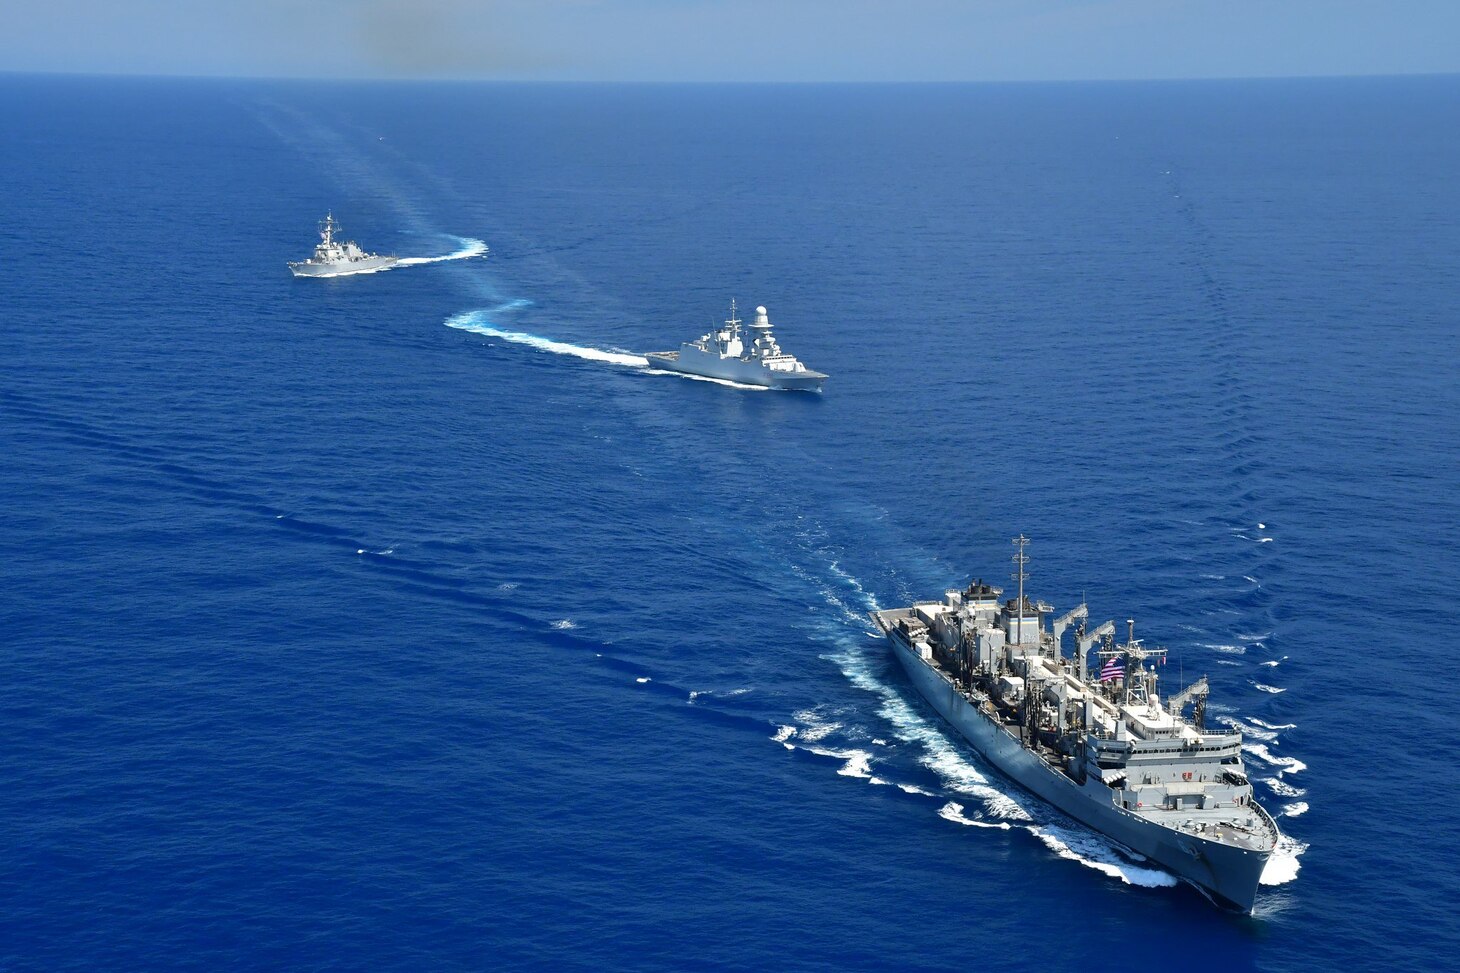 200422-N-NO090-0001 MEDITERRANEAN SEA- The Arleigh Burke-class guided-missile destroyer USS Porter (DDG 78), USNS Supply (T-AOE 6), and ITS Federico Martinengo (F 596) conduct a photo exercise (PHOTOEX) while conducting joint operations to ensure maritime security in the Mediterranean Sea, 22 April. The frequent seamless operations between the Italian and American navies demonstrate strength and professionalism inherent in steady, practiced partnership. U.S. 6th Fleet, headquartered in Naples, Italy, conducts the full spectrum of joint and naval operations, often in concert with allied and interagency partners, in order to advance U.S. national interests and security and stability in Europe and Africa. (Photo courtesy of U.S. Navy)